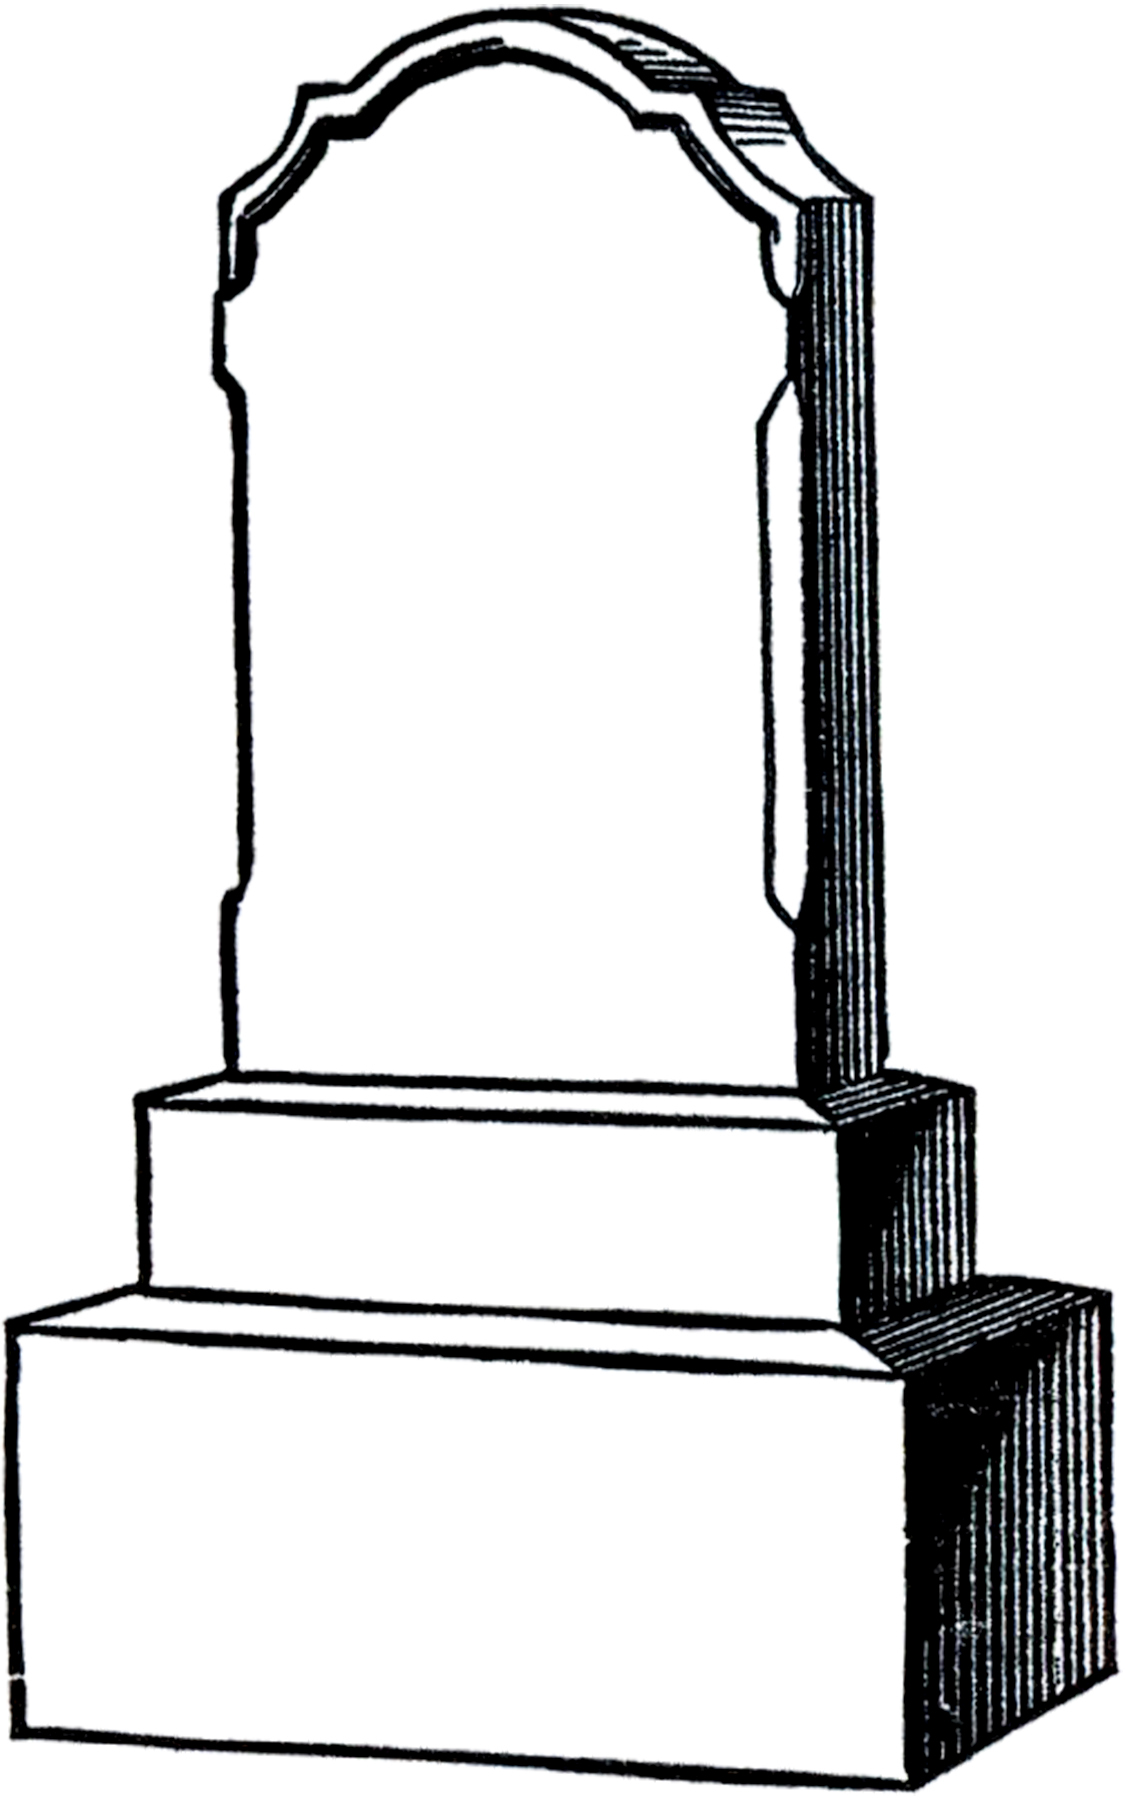 Tombstone Template Printable - ClipArt Best